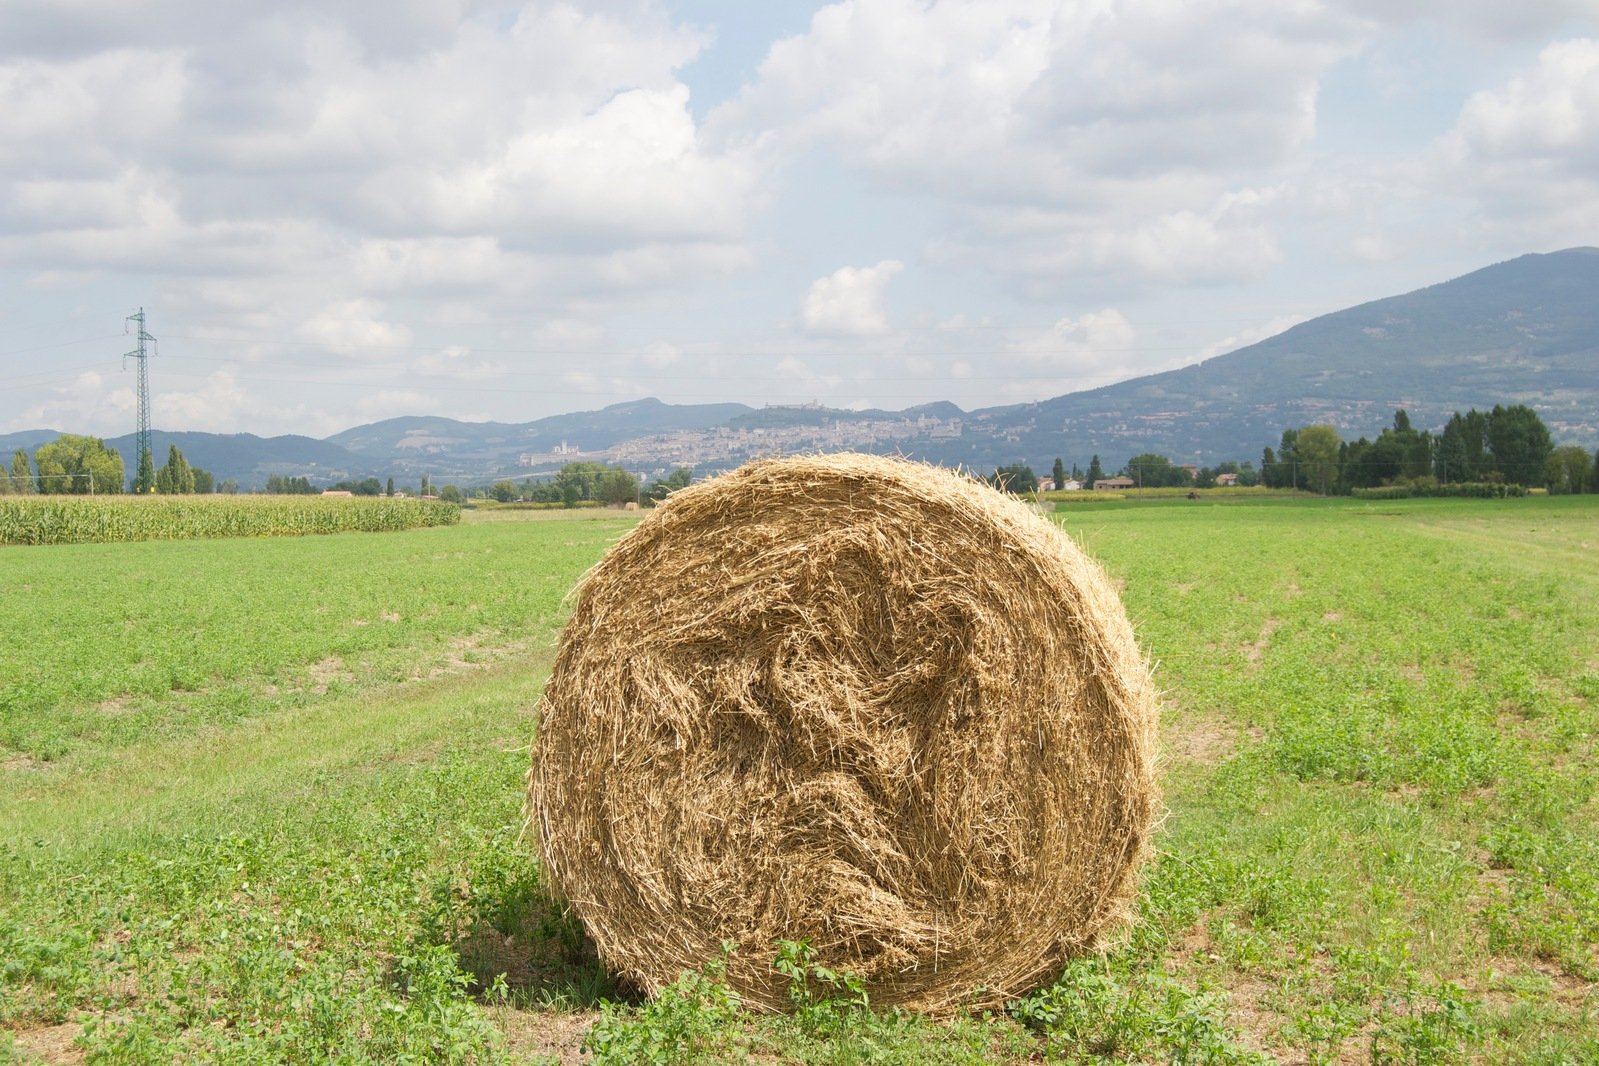 the hay bale is on the farm field